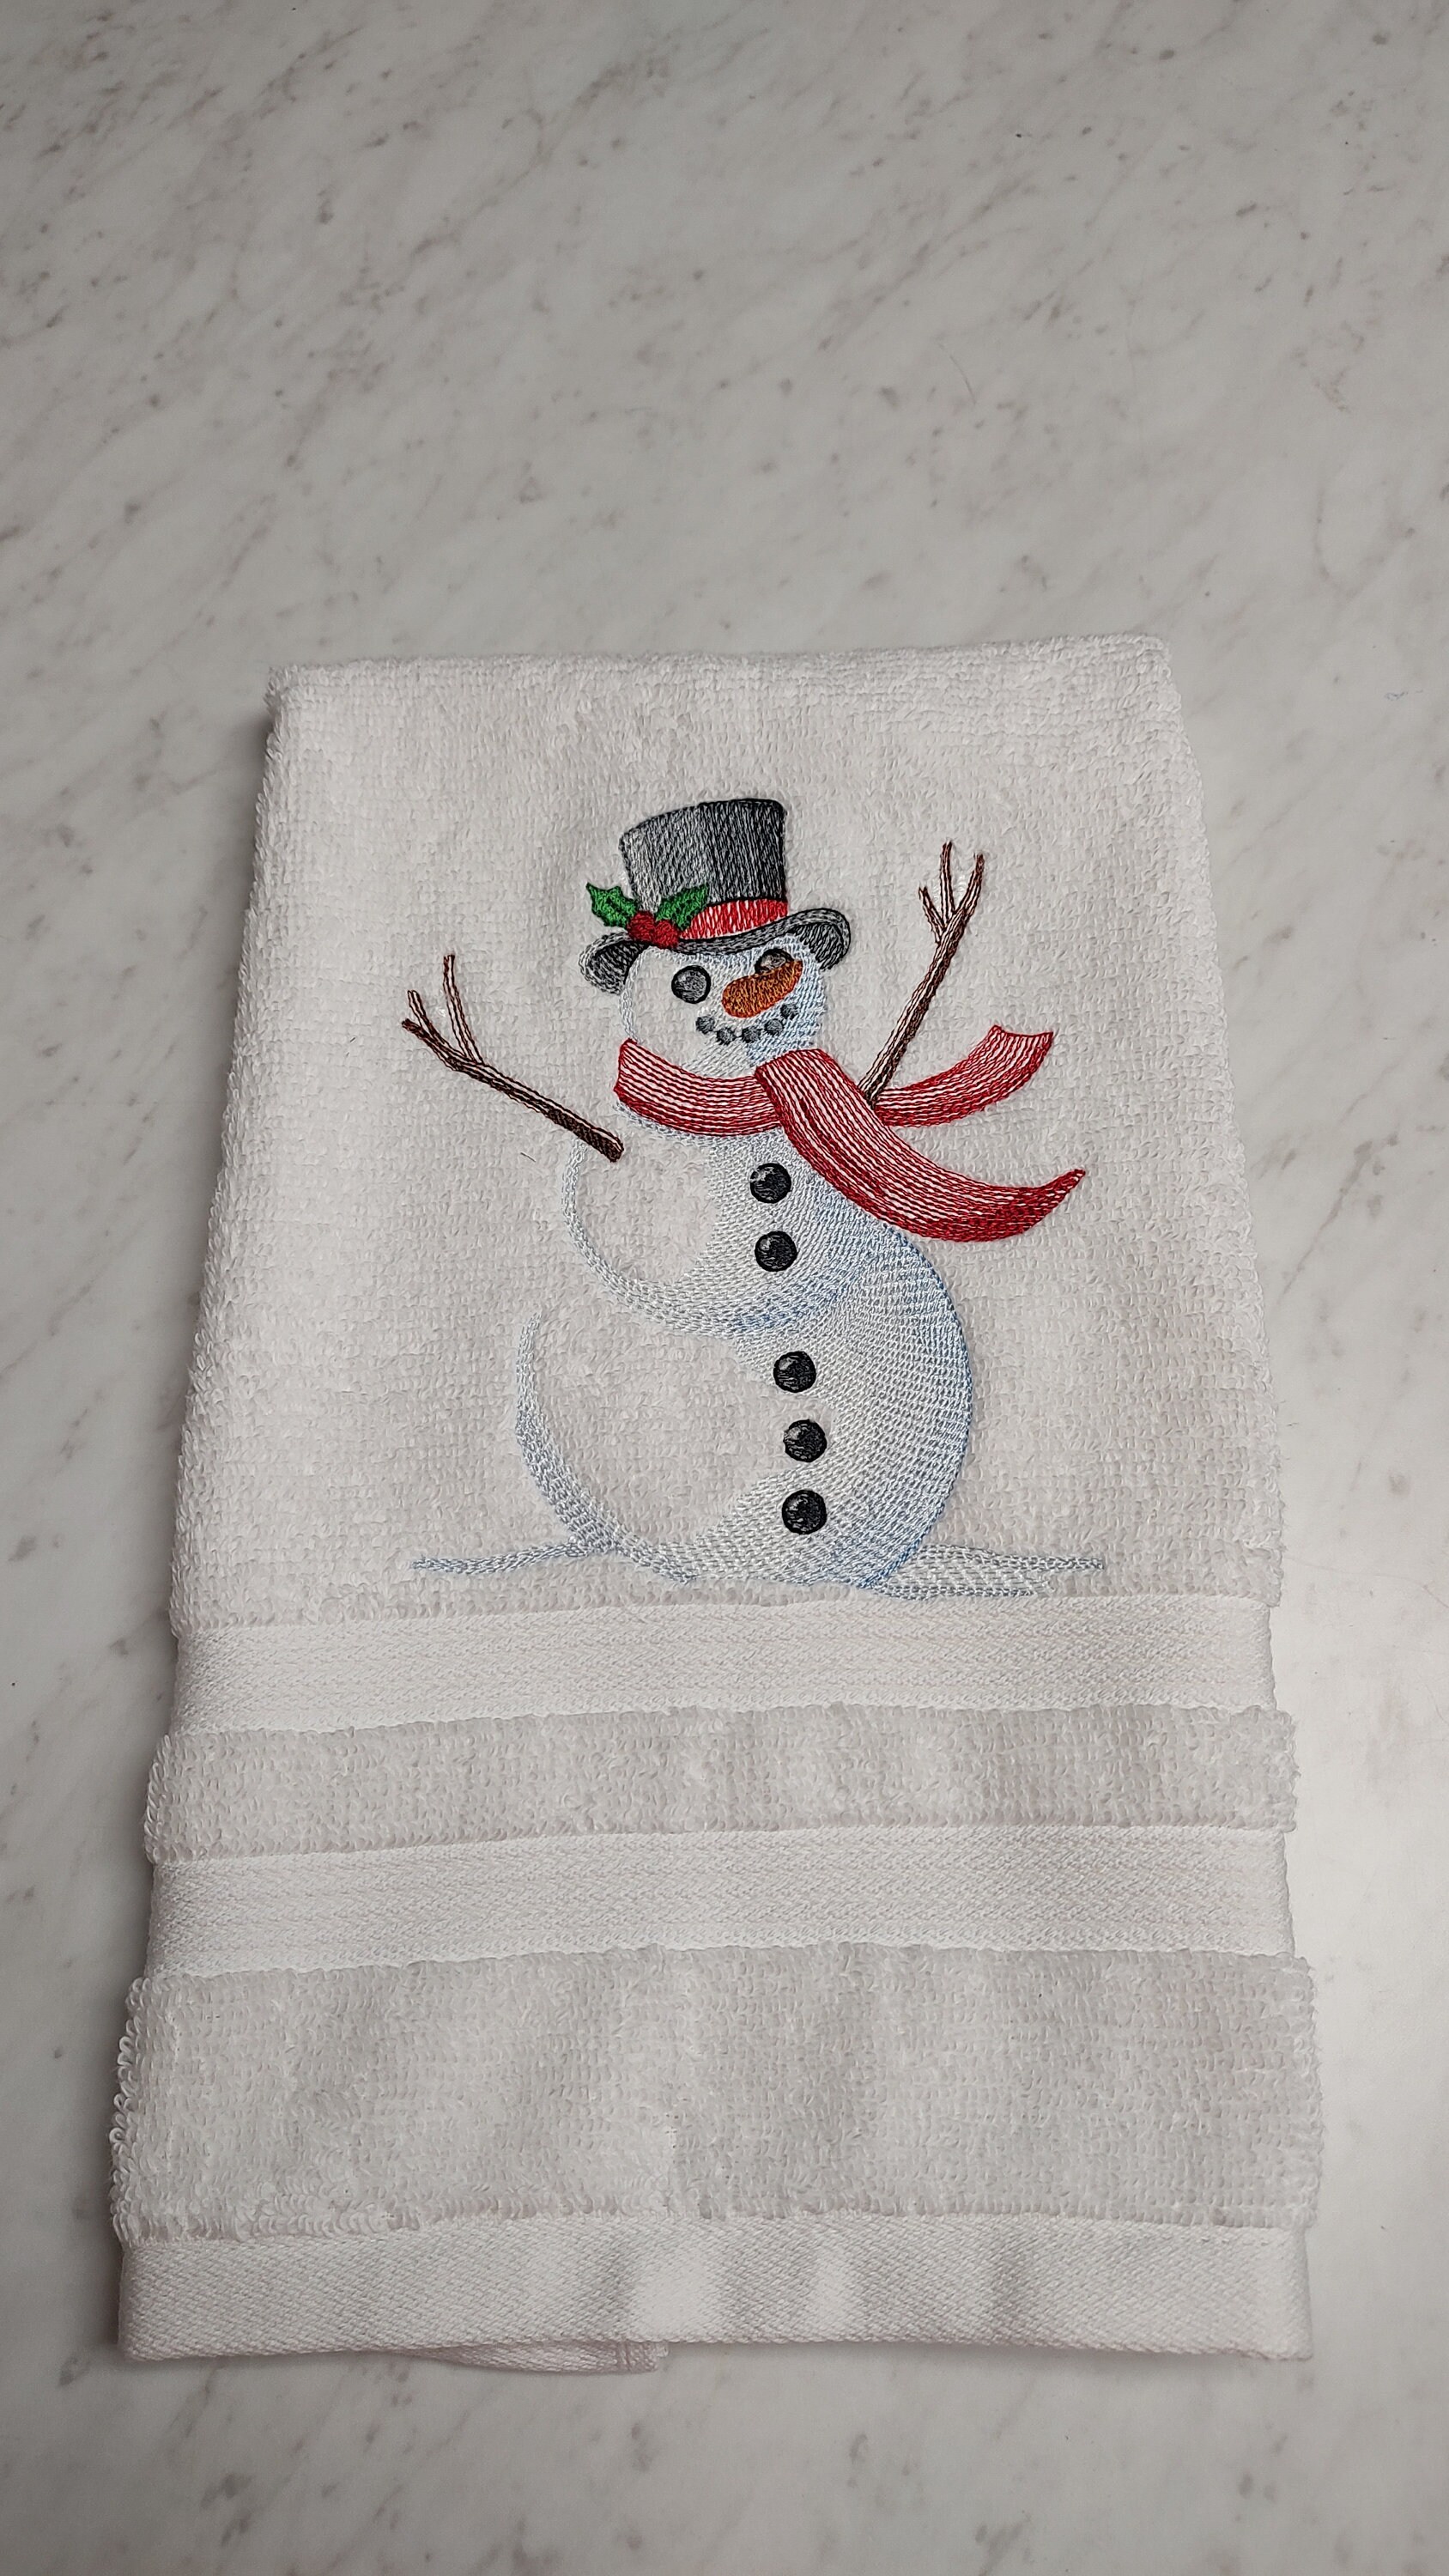 Snowman Christmas Towel, Christmas Kitchen Towels, Red Snowman Towels, –  Country Squared